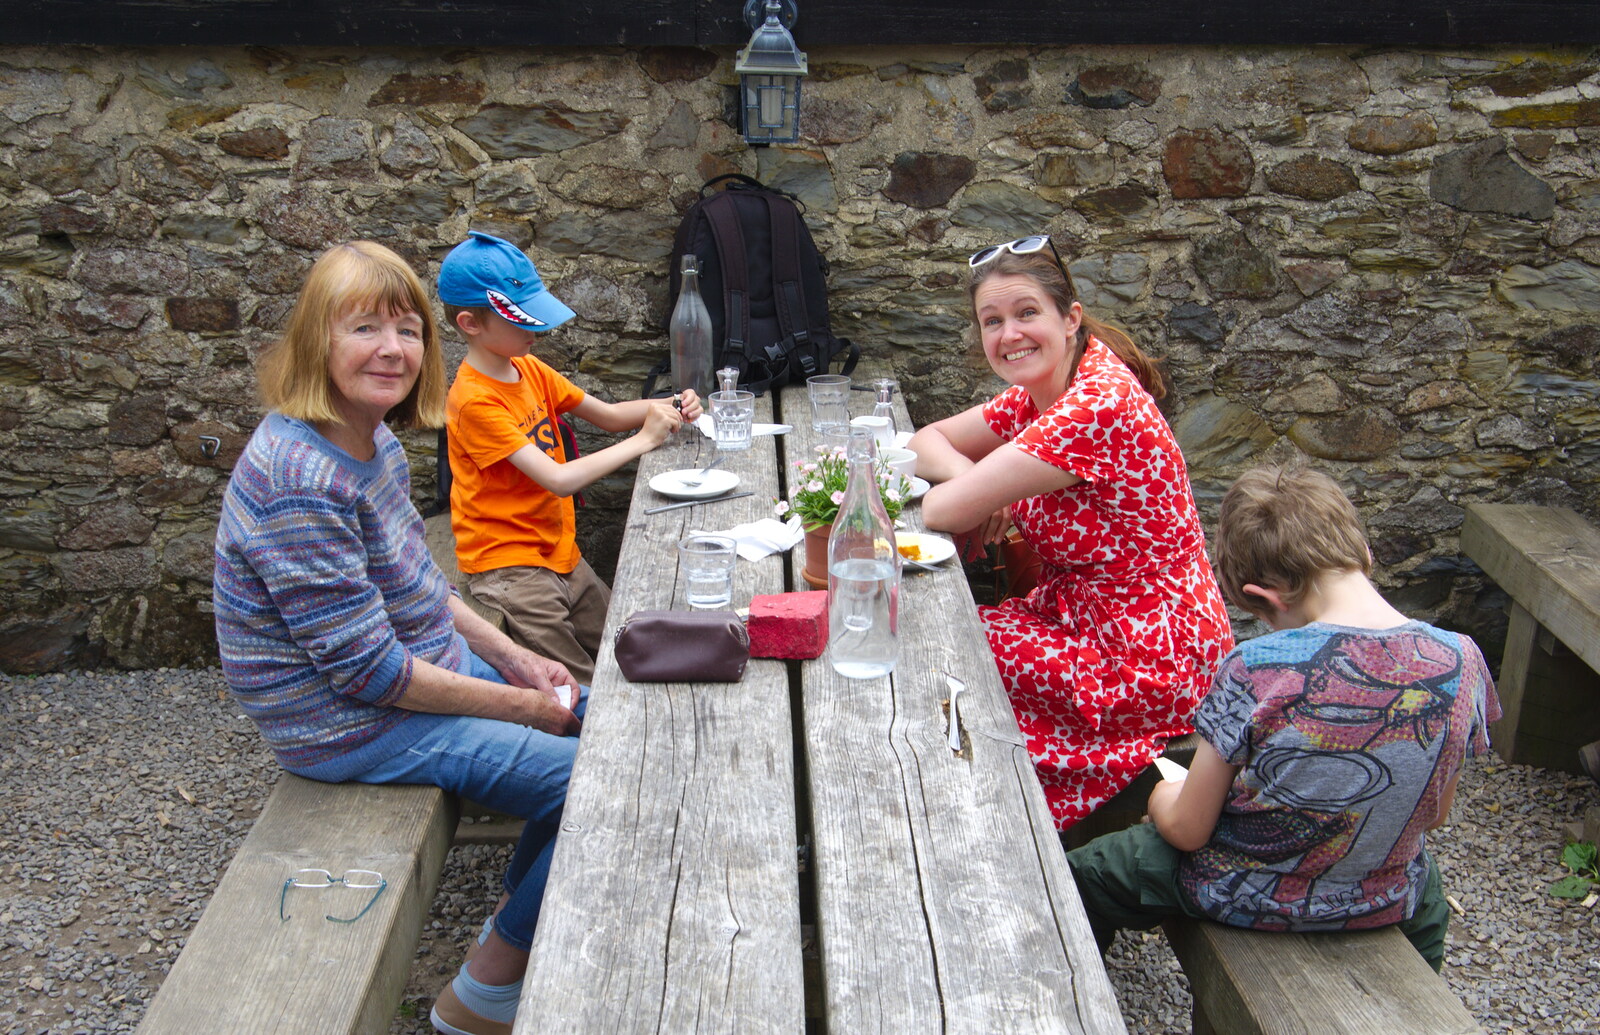 Chagford Lido and a Trip to Parke, Bovey Tracey, Devon - 25th May 2019: The gang